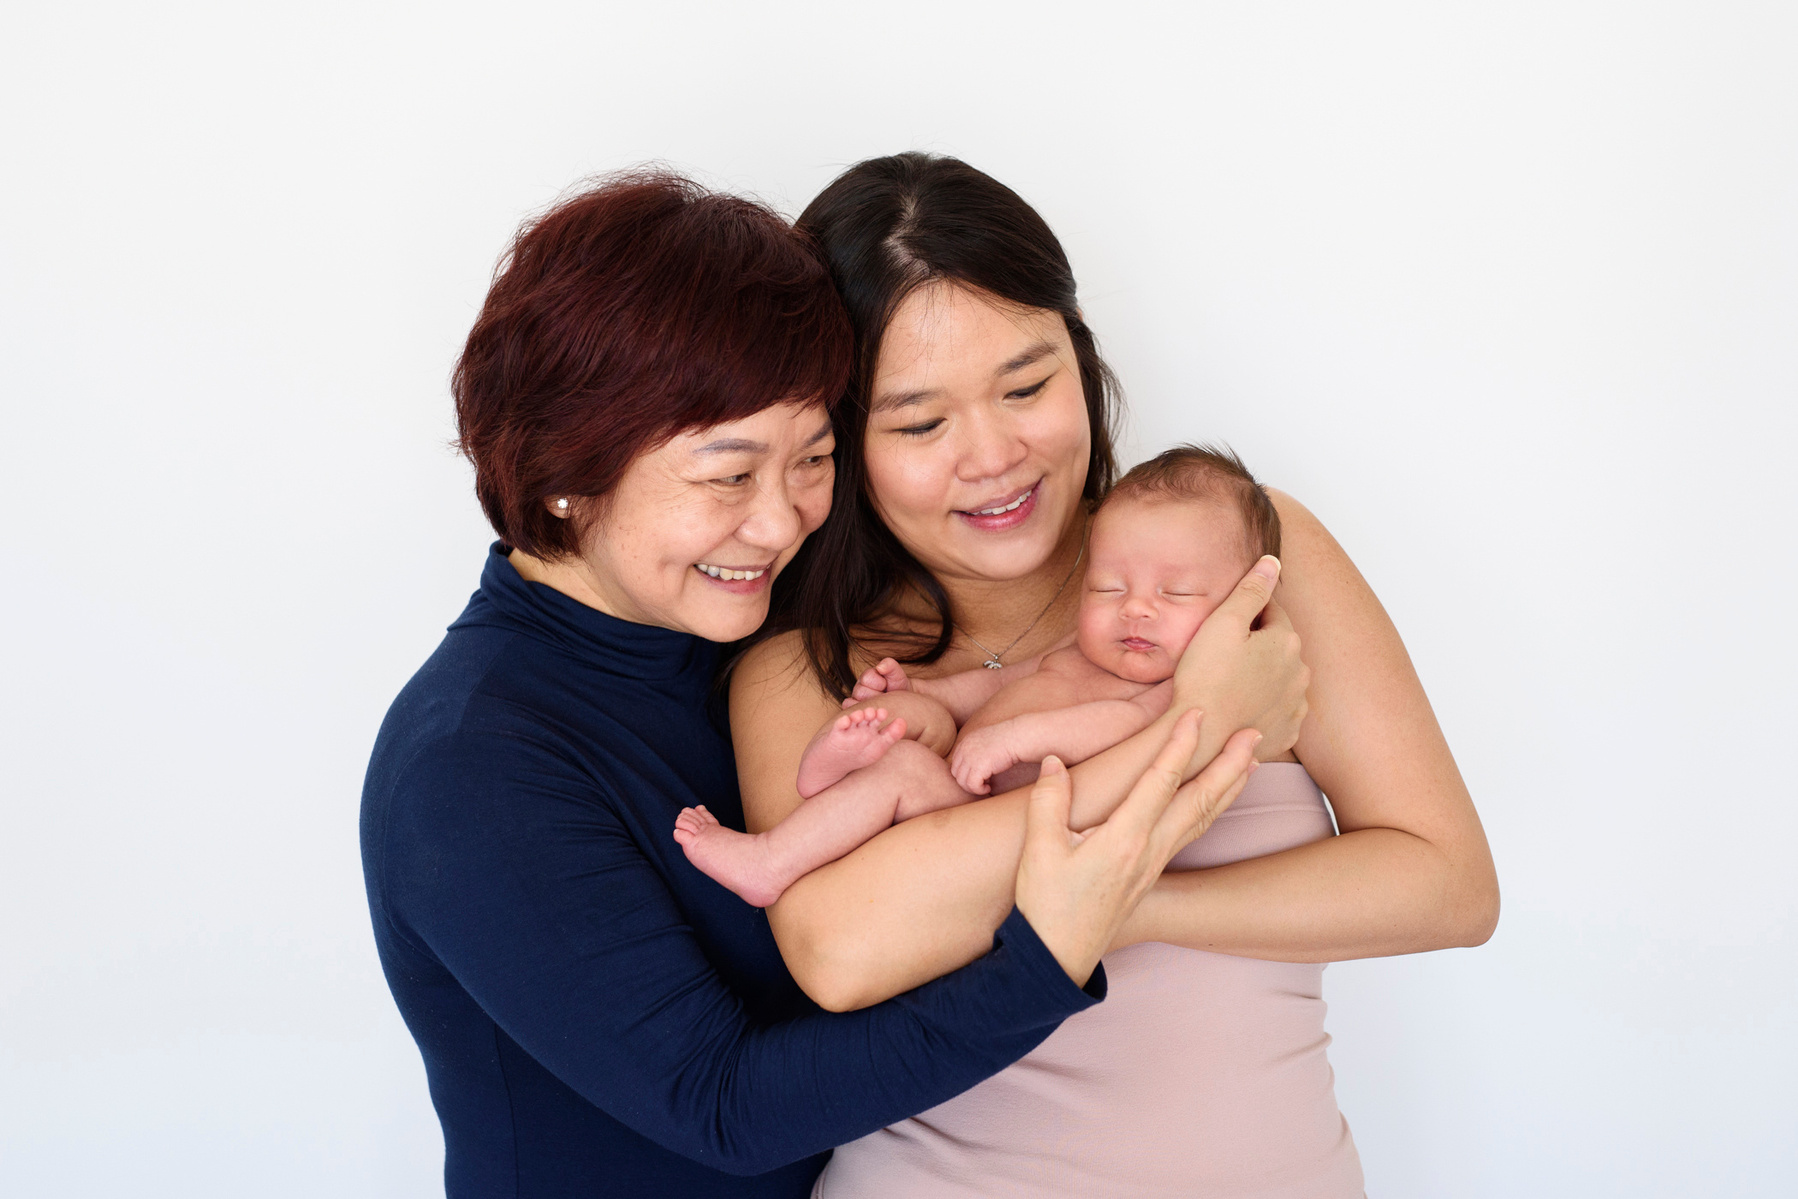 Three generations, the mother cradles her newborn son in her arms whilst the grandmother gets close for a family portrait. Photographed by Geneva's leading portrait photographer, Helen Putsman, based in Chêne-Bougeries.